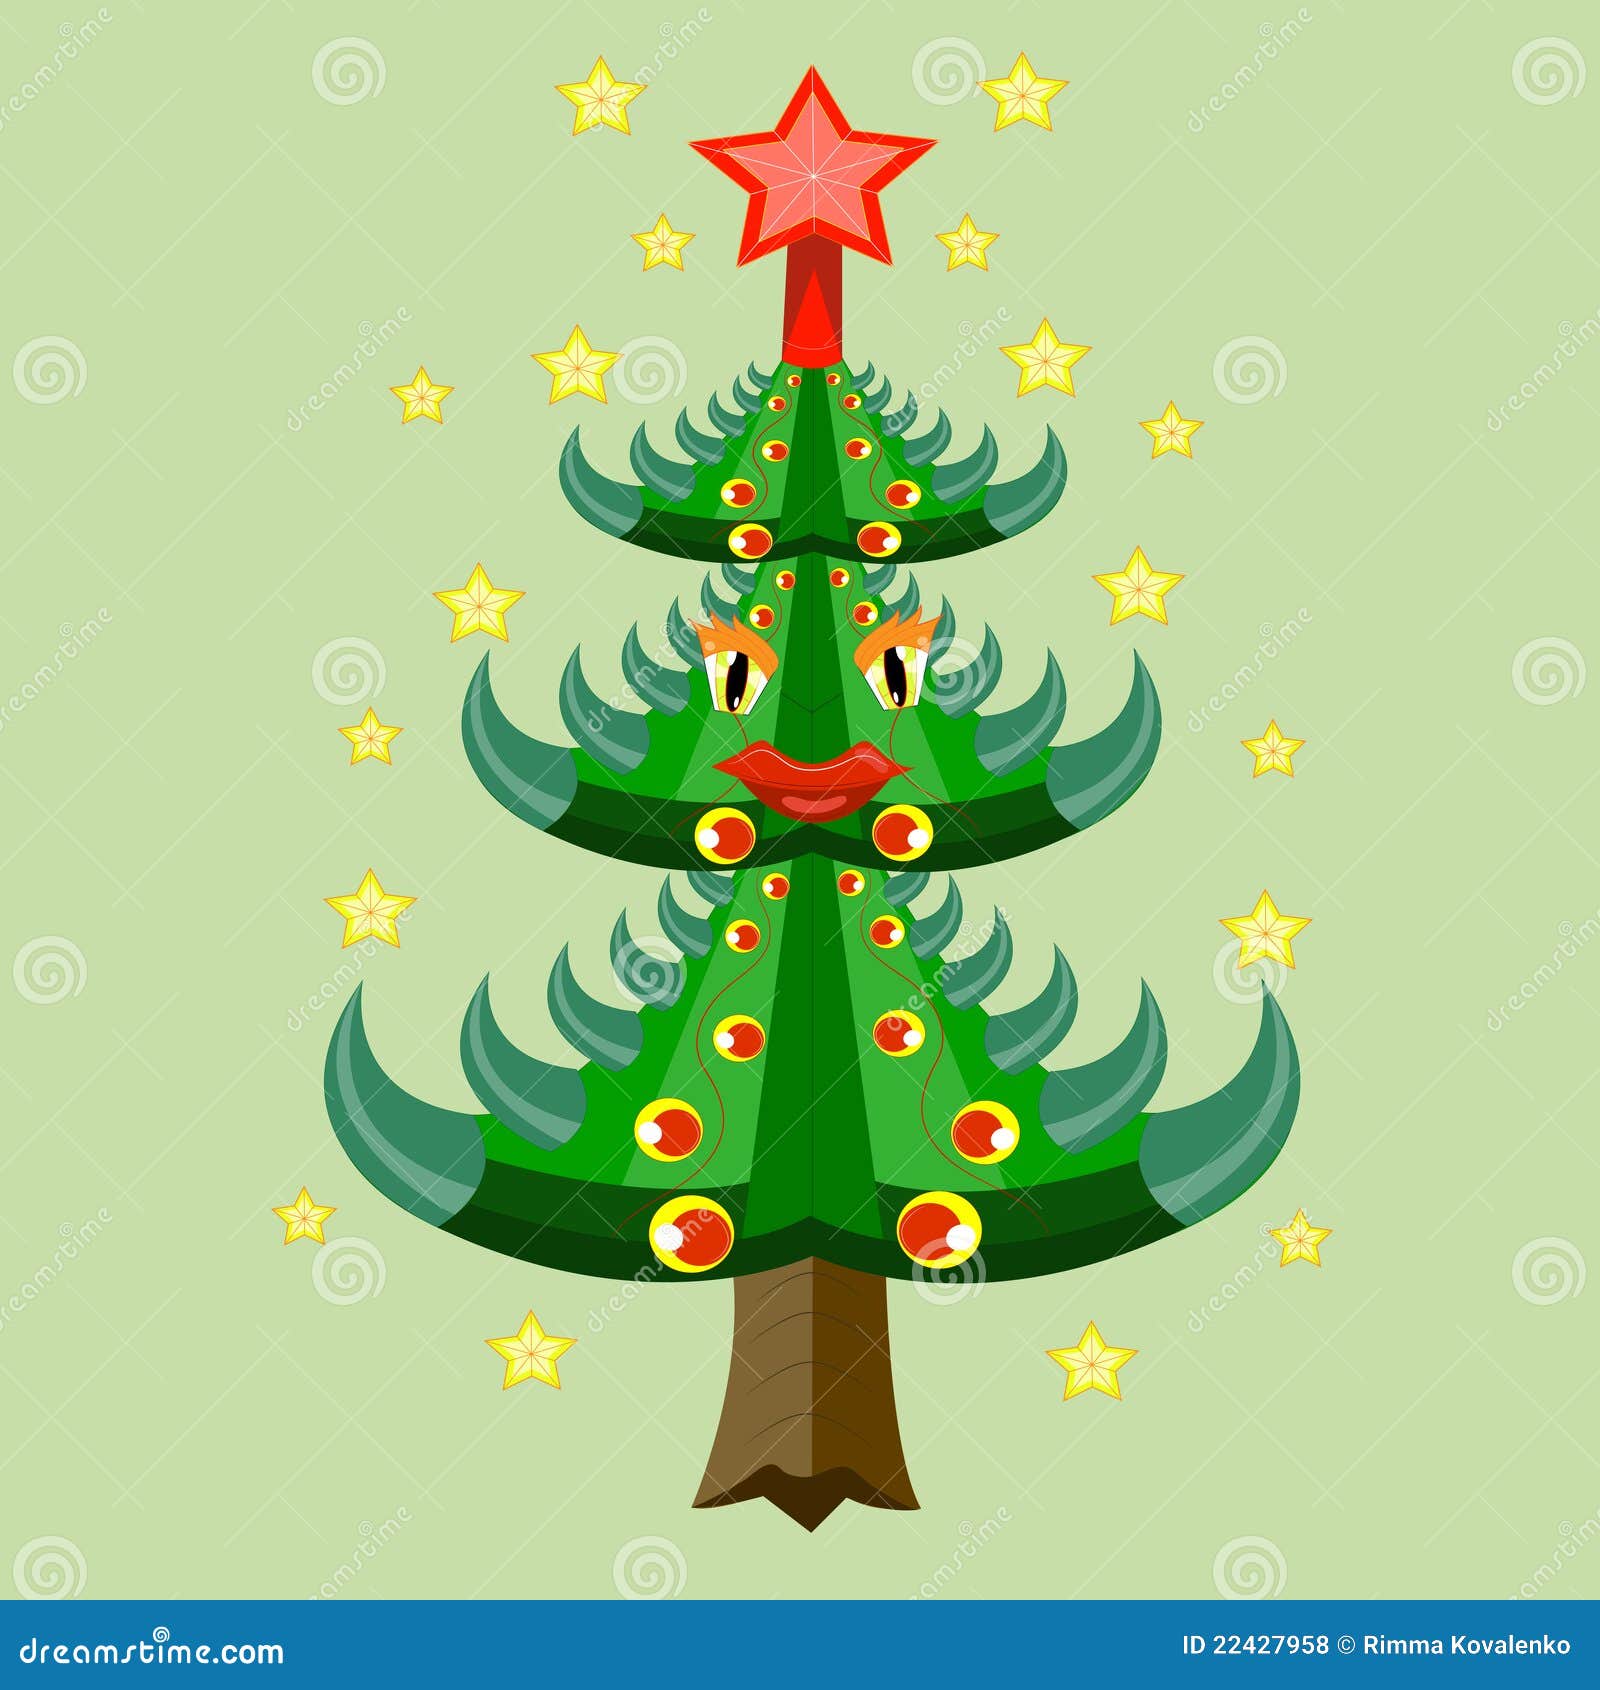 The decorated Christmas tree. Vector.